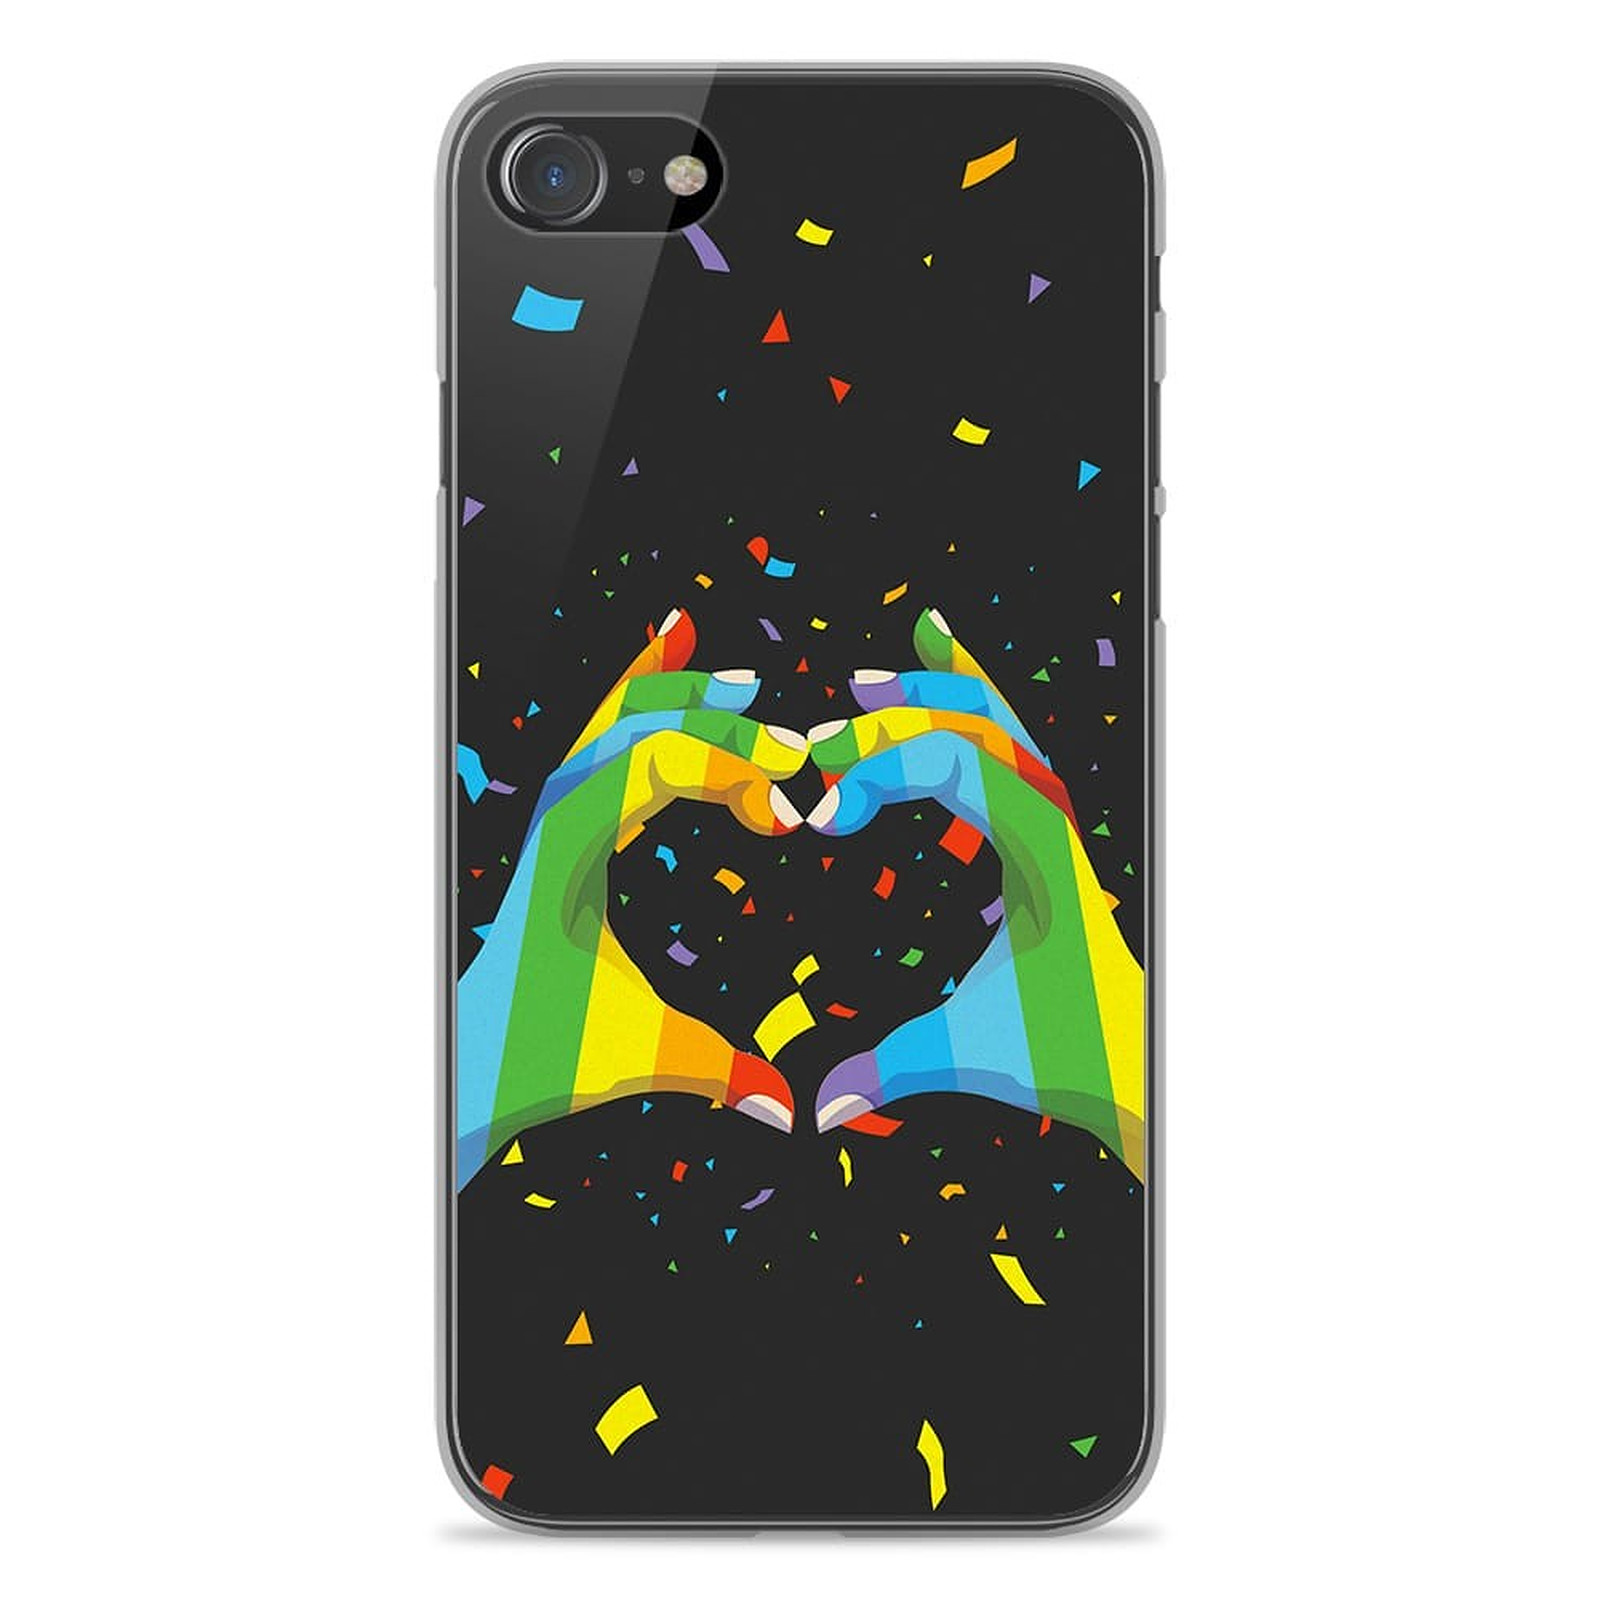 1001 Coques Coque silicone gel Apple iPhone SE 2020 motif LGBT - Coque telephone 1001Coques